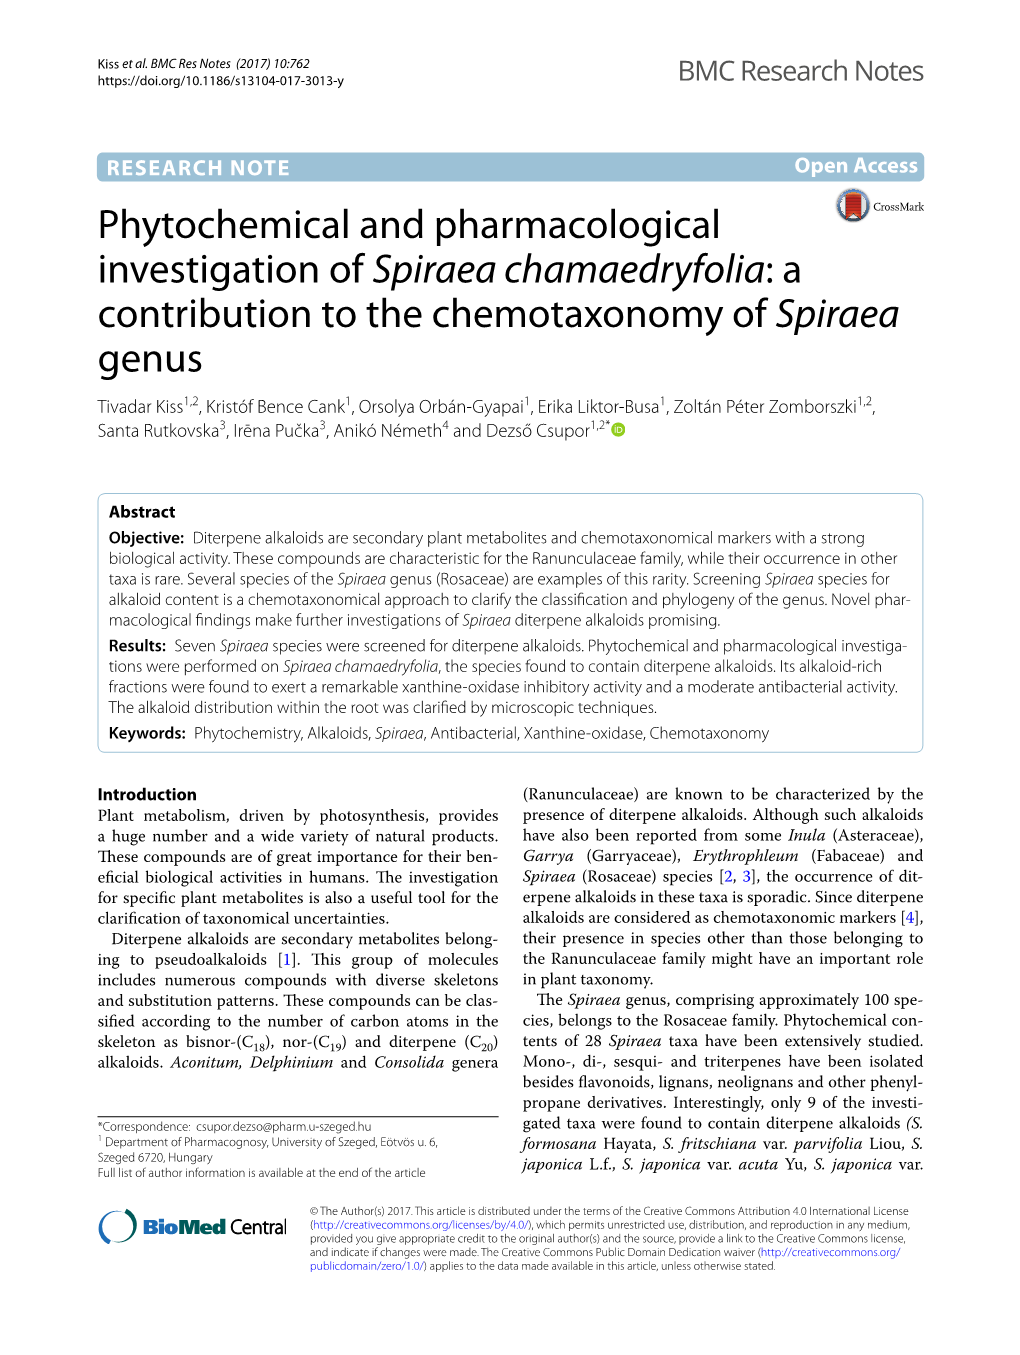 Phytochemical and Pharmacological Investigation of Spiraea